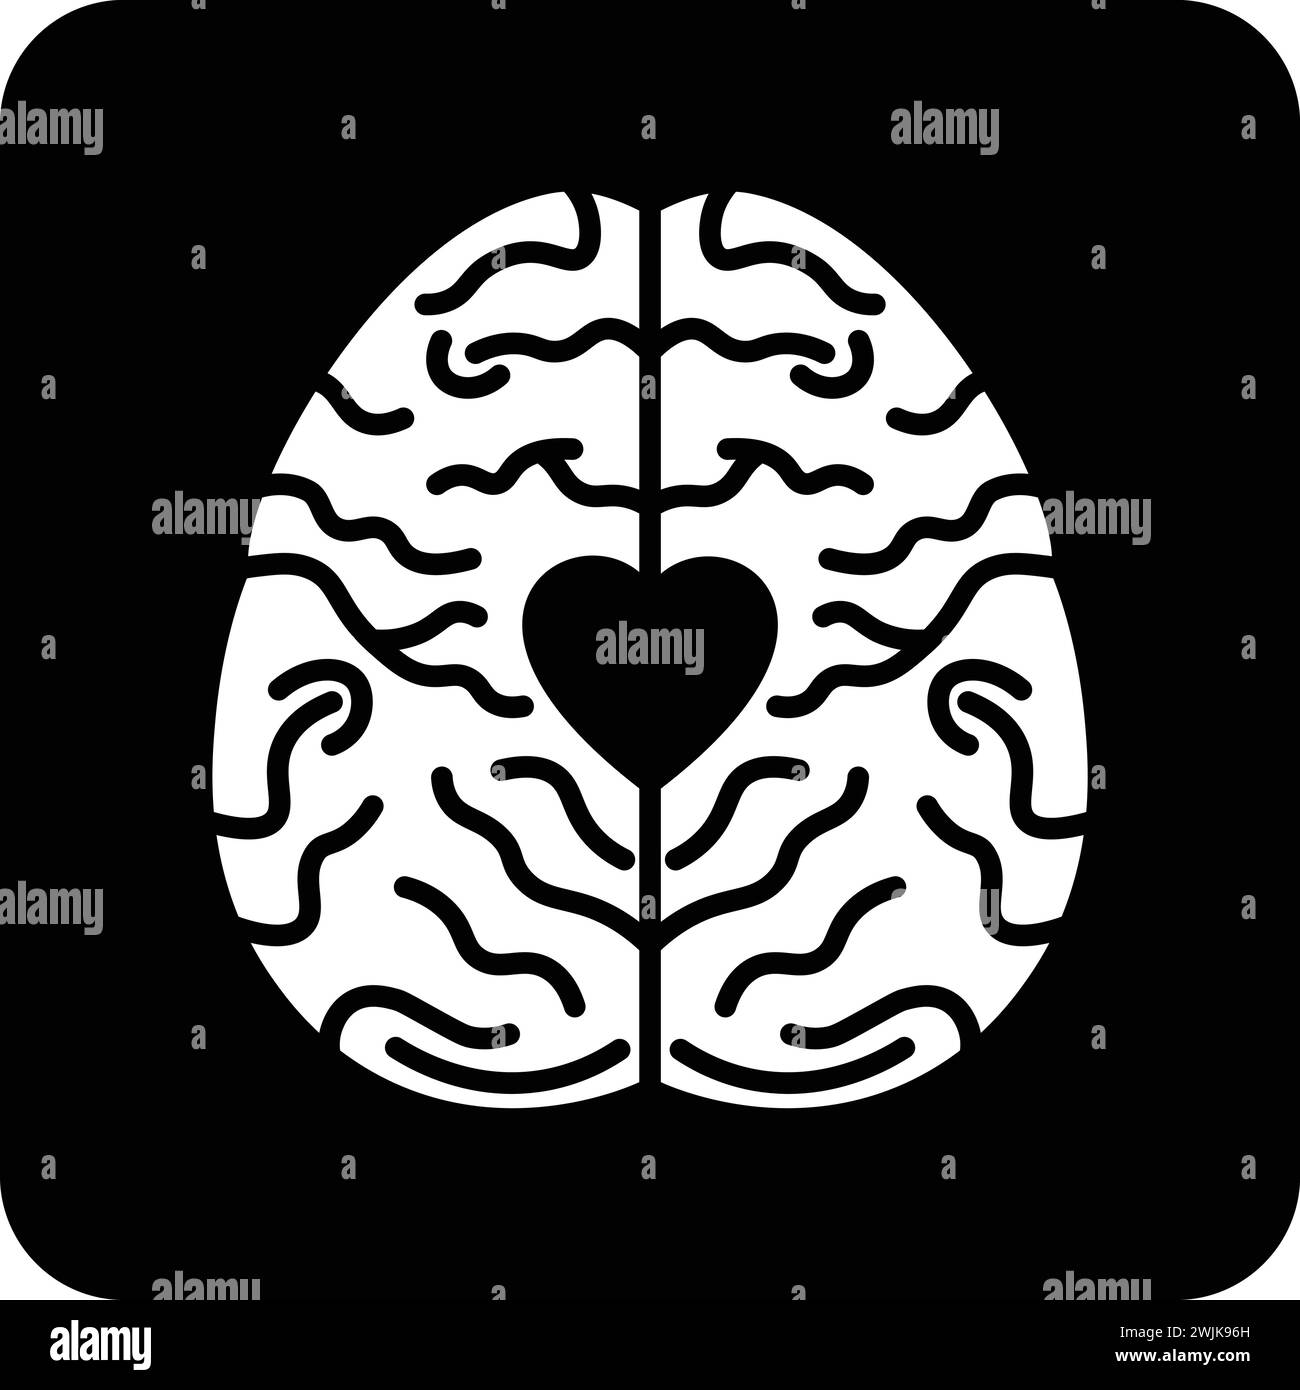 Mental health icon black and white flat vector illustration Stock Vector